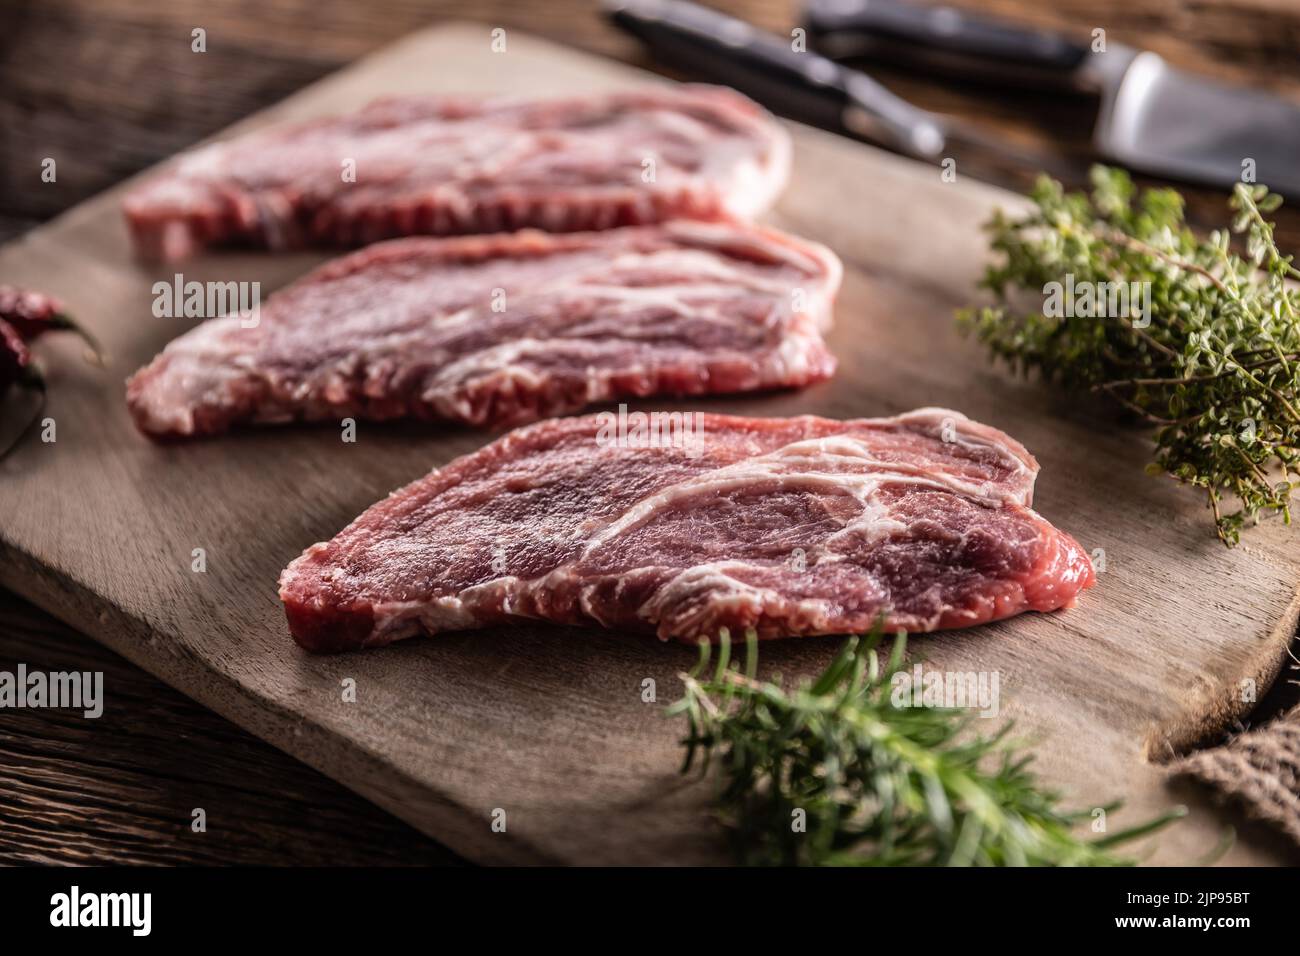 Raw pork neck cut on a cutting board with rosemary and thyme herbs. Stock Photo